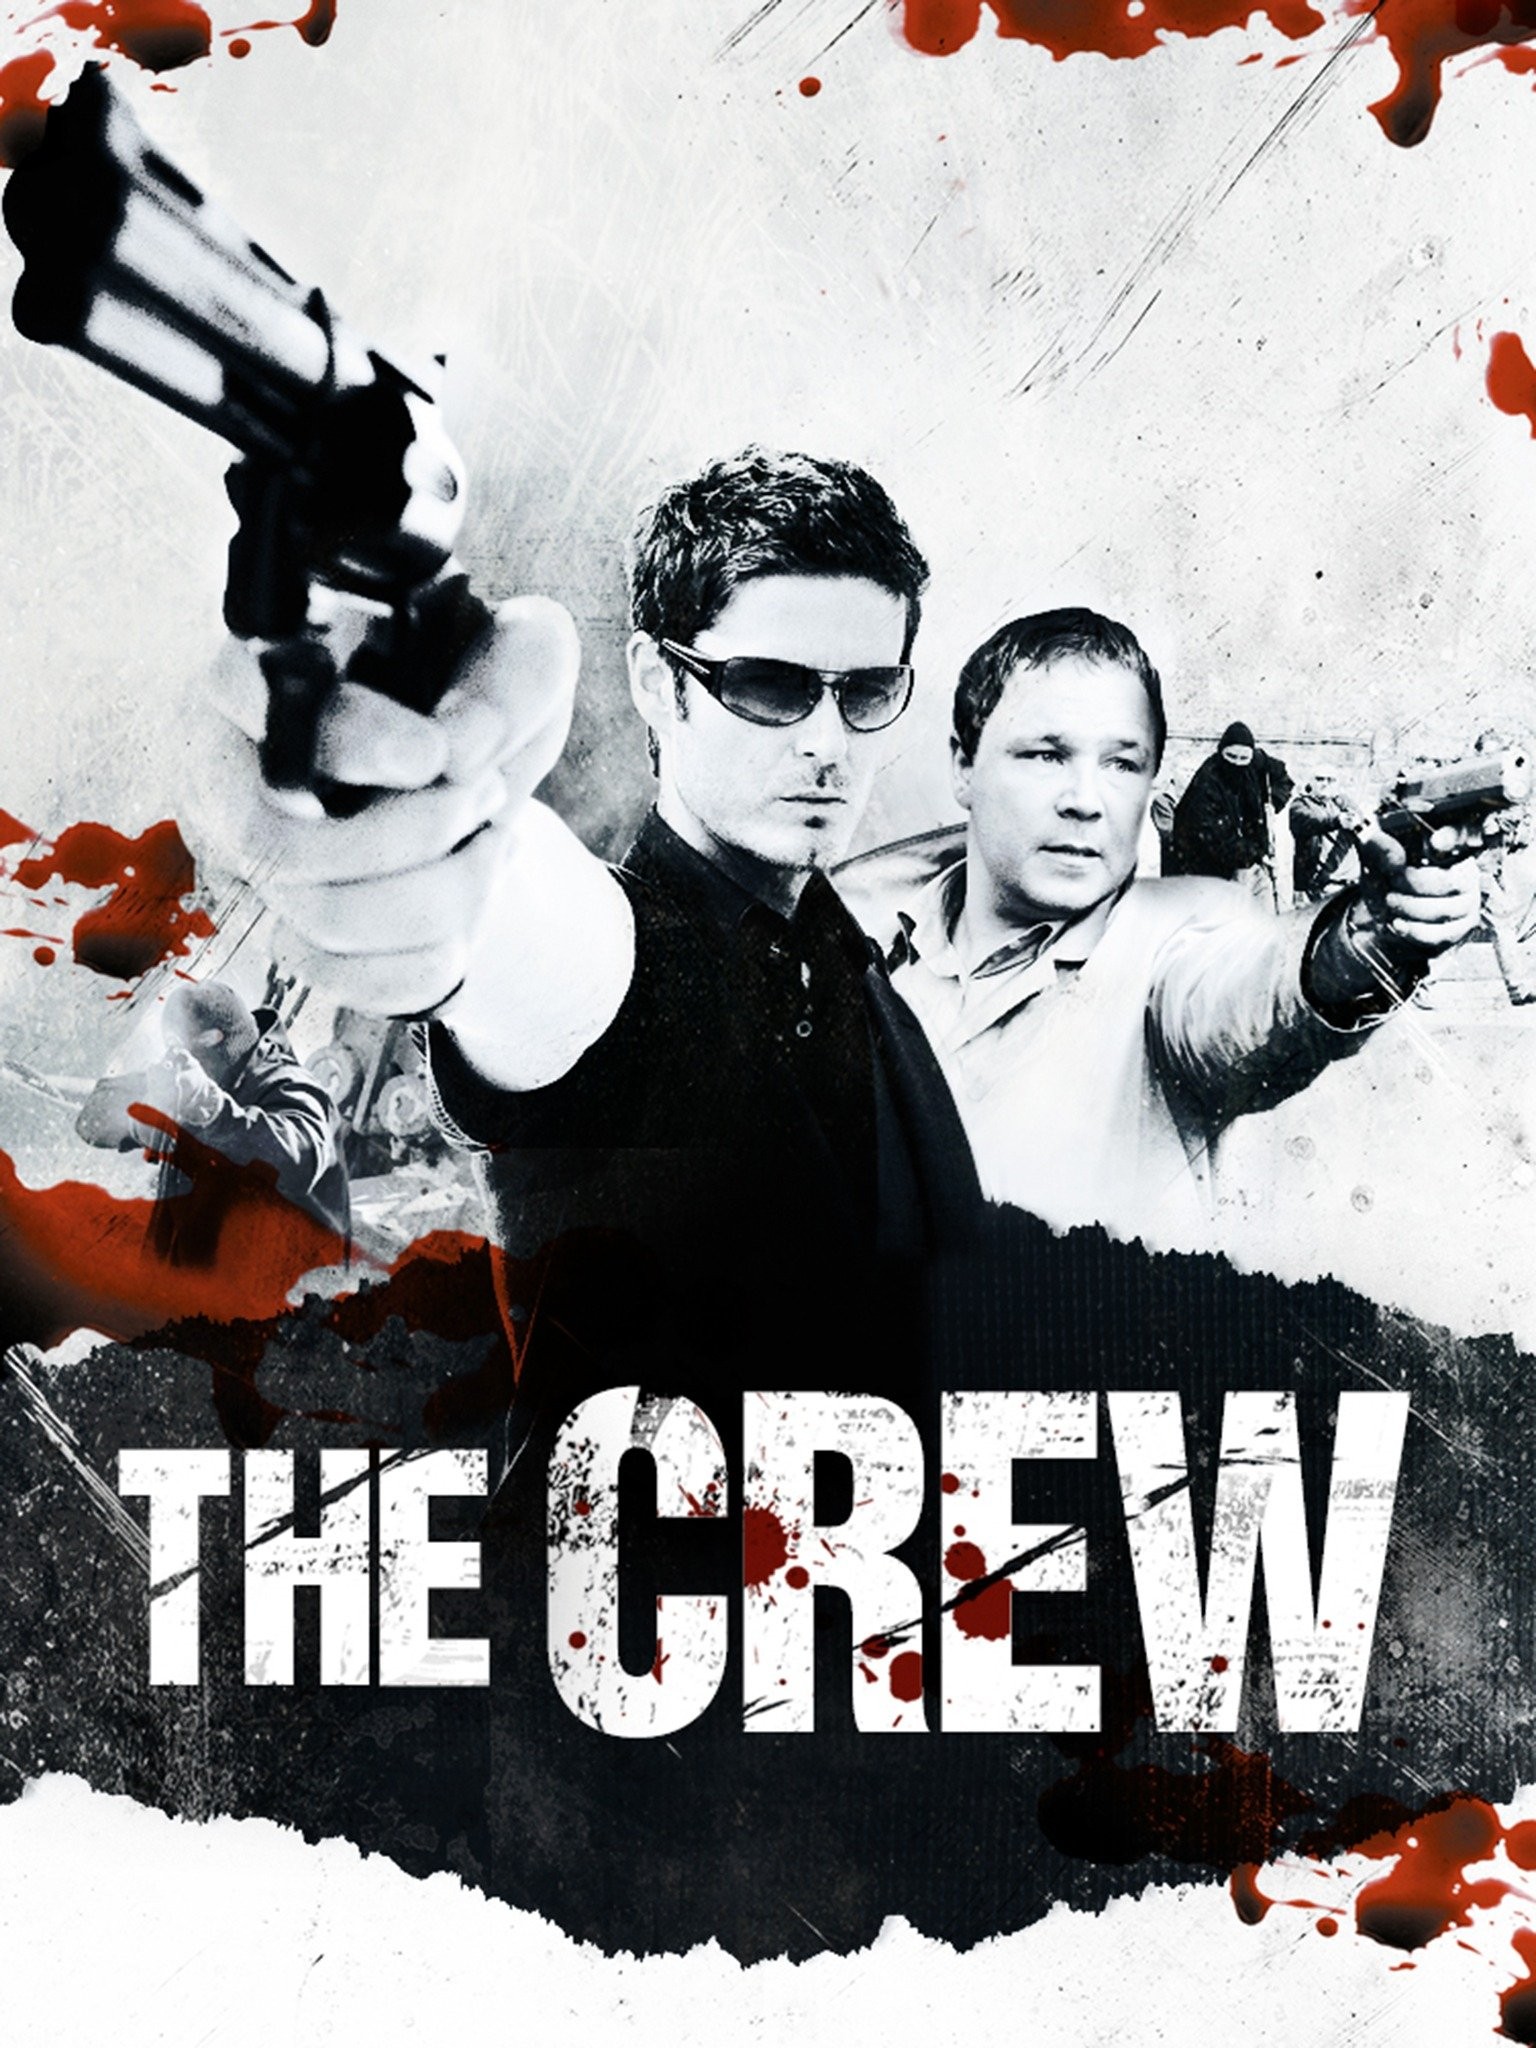 The Crew - Rotten Tomatoes